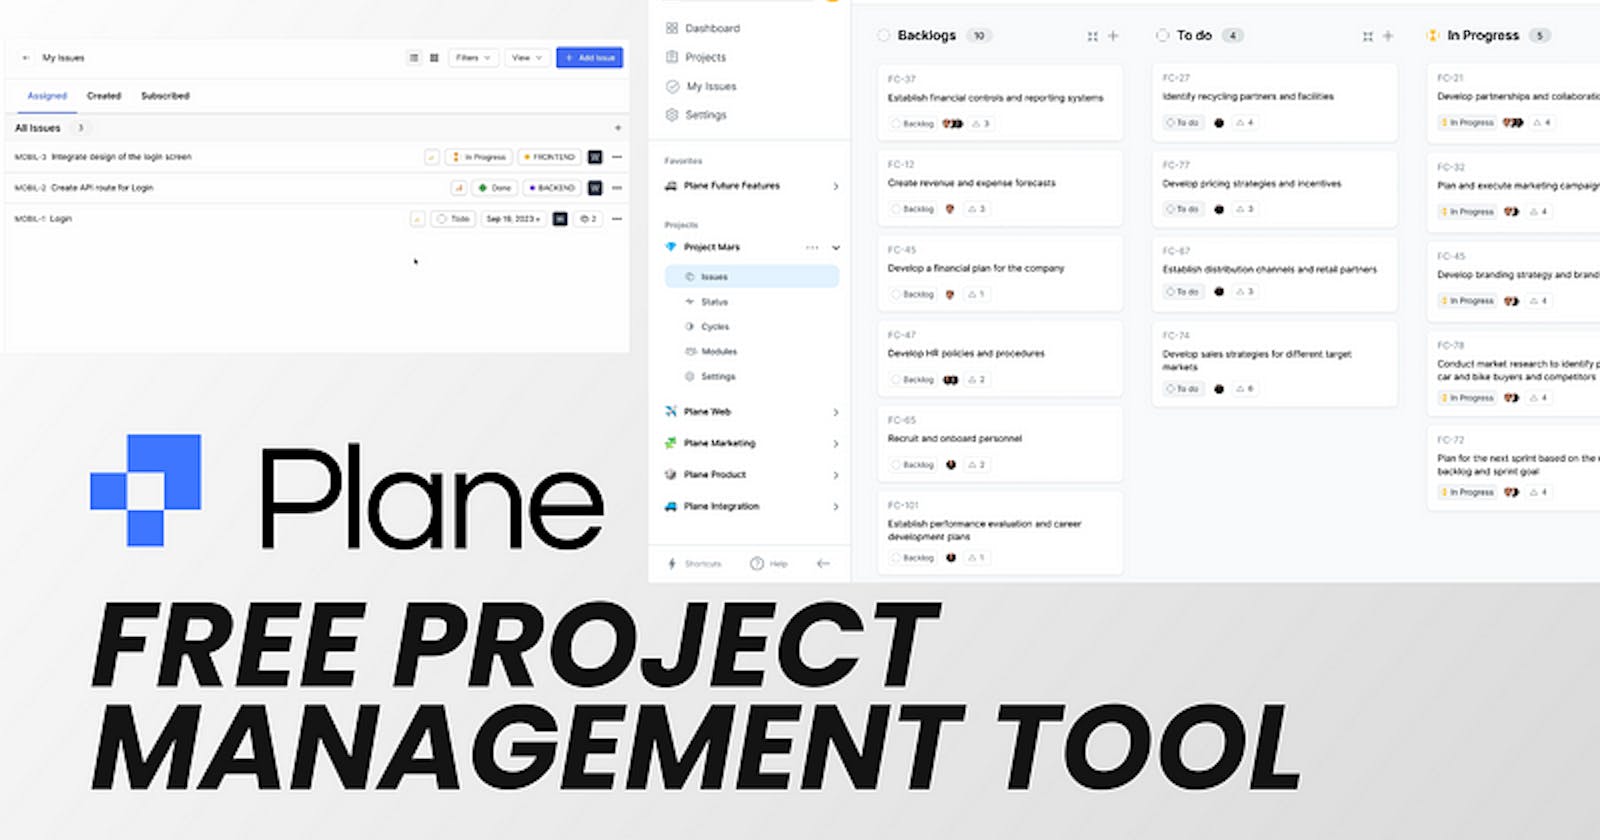 Project Management with Plane: A free Open Source alternative to Jira, Asana, and Trello